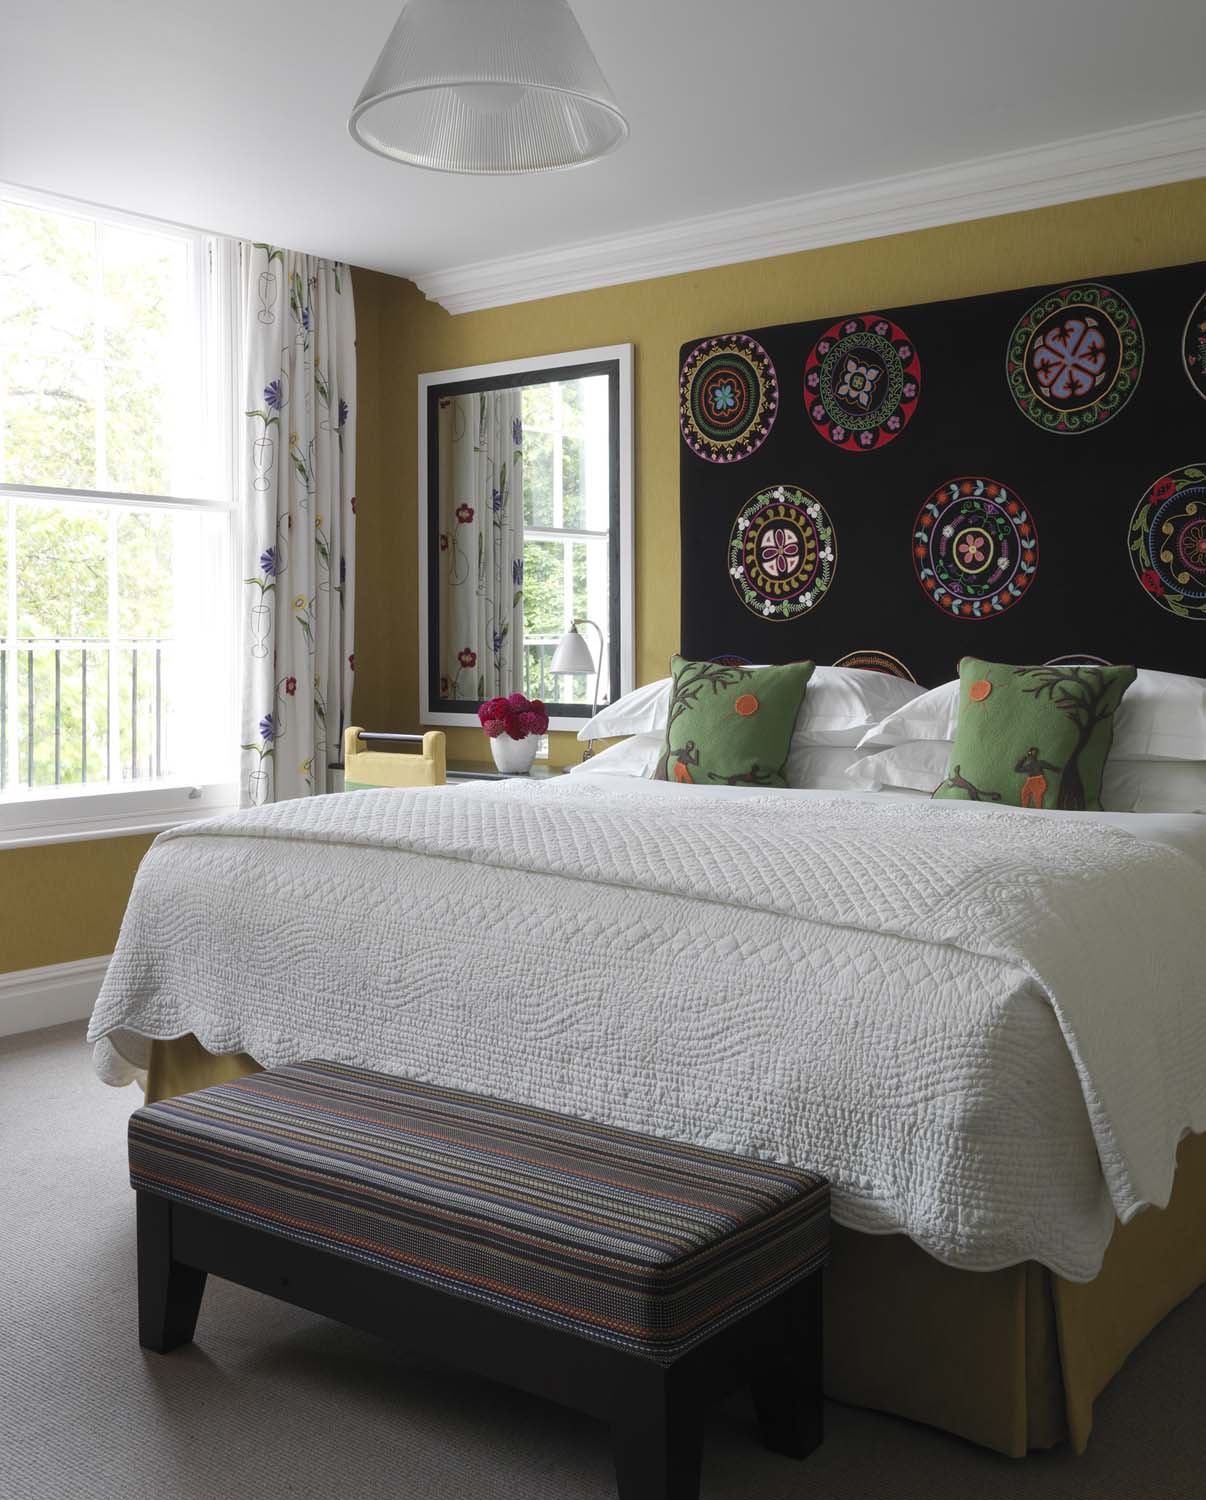 The Dorset Square room designed by Kit Kemp with embroidered headboard